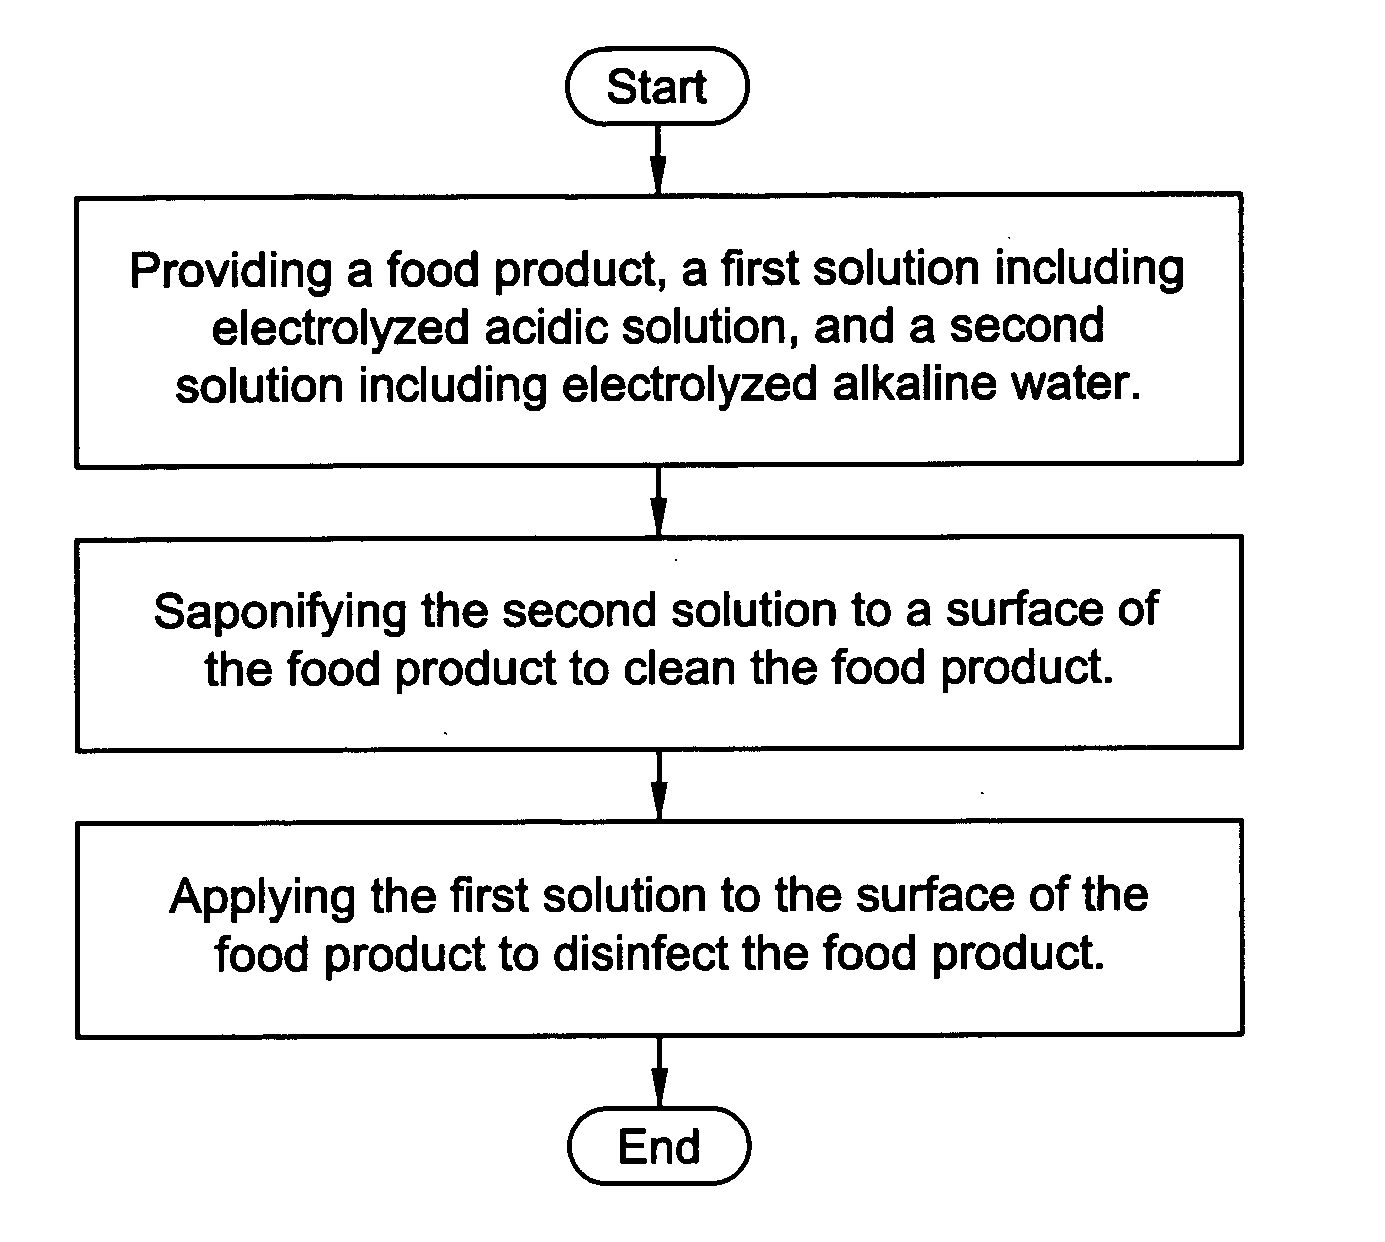 Electrolyzed water treatment for meat and hide